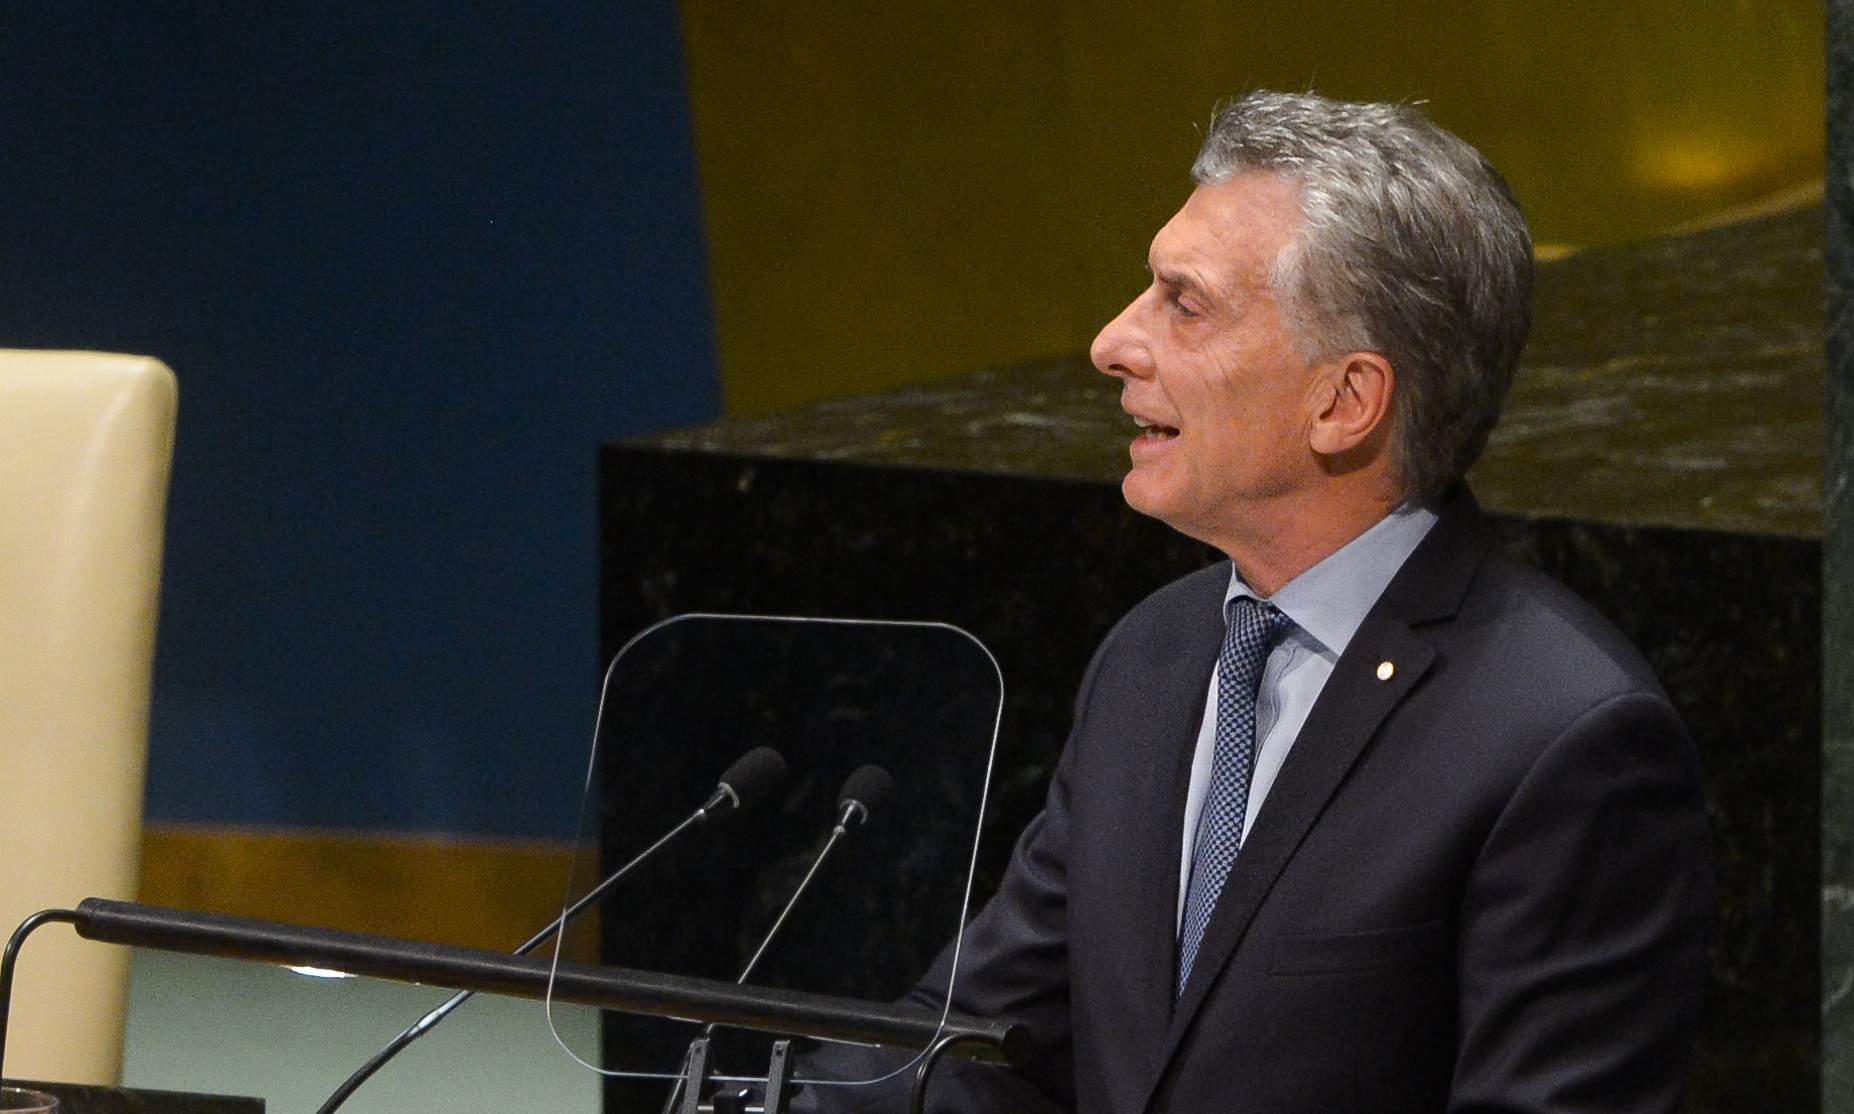 President Macri ratifies Argentina's commitment to the global agenda and advocates for more integration and international cooperation